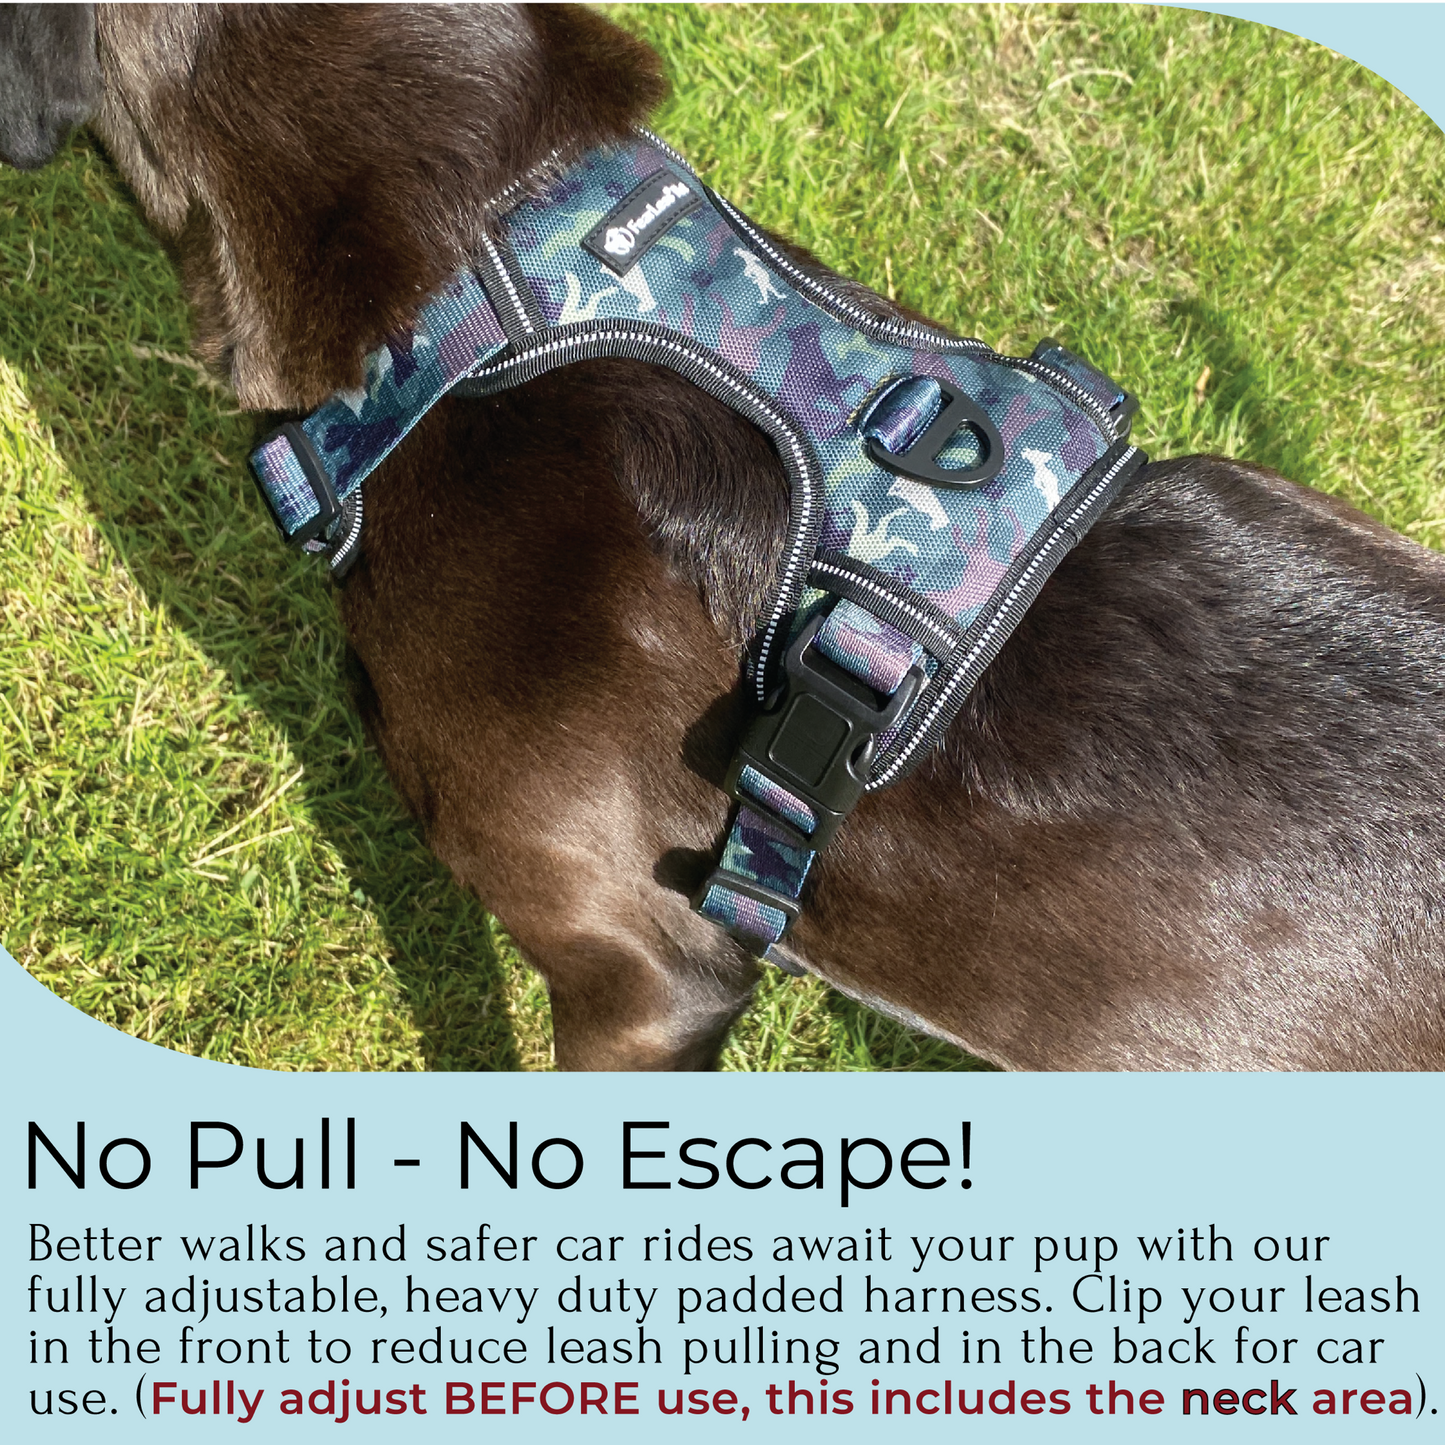 a photo of a no pull dog harness in camo print on the back of a black, large dog. Tex below indicates harness is no pull and no escape